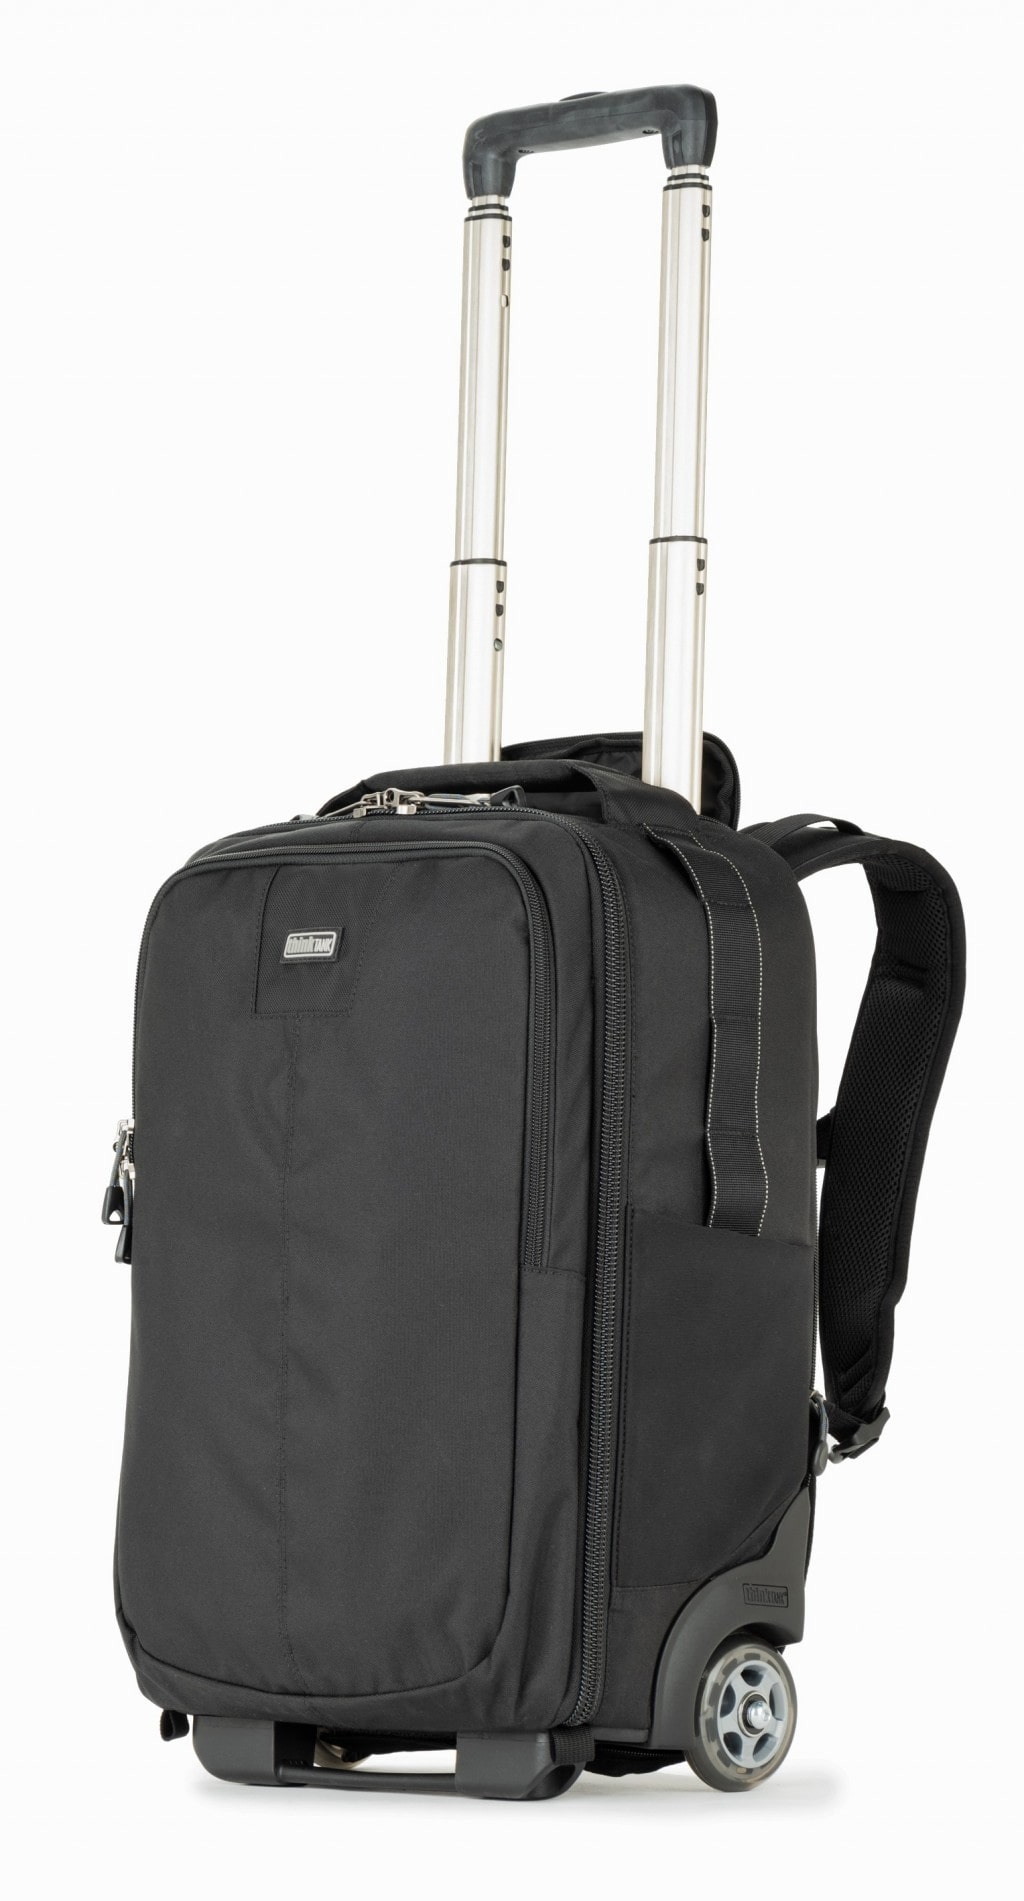 Think Tank Airport Essentials Convertible Rolling Backpack